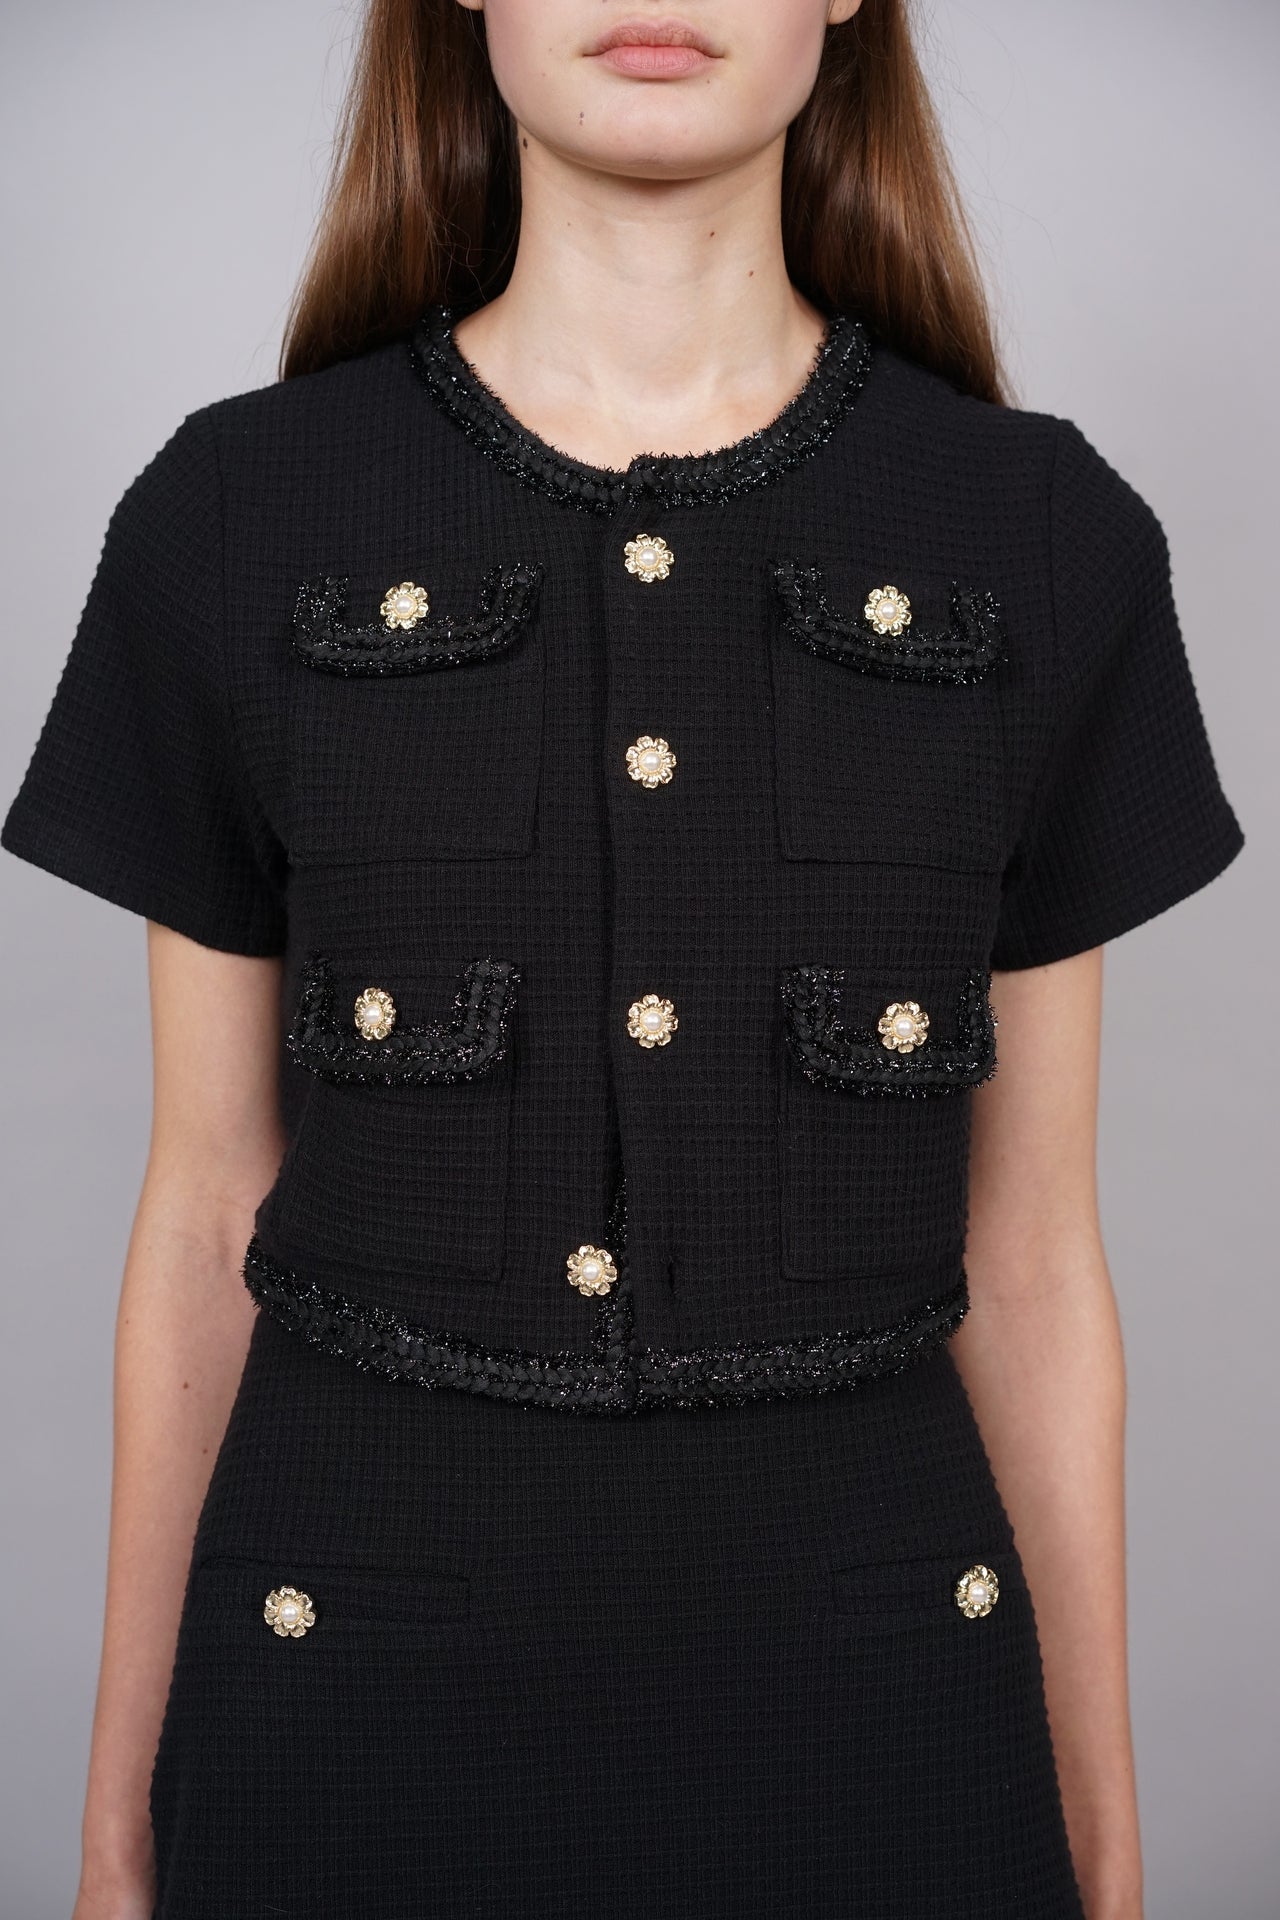 Braid Trim Buttoned Top in Black - Arriving Soon